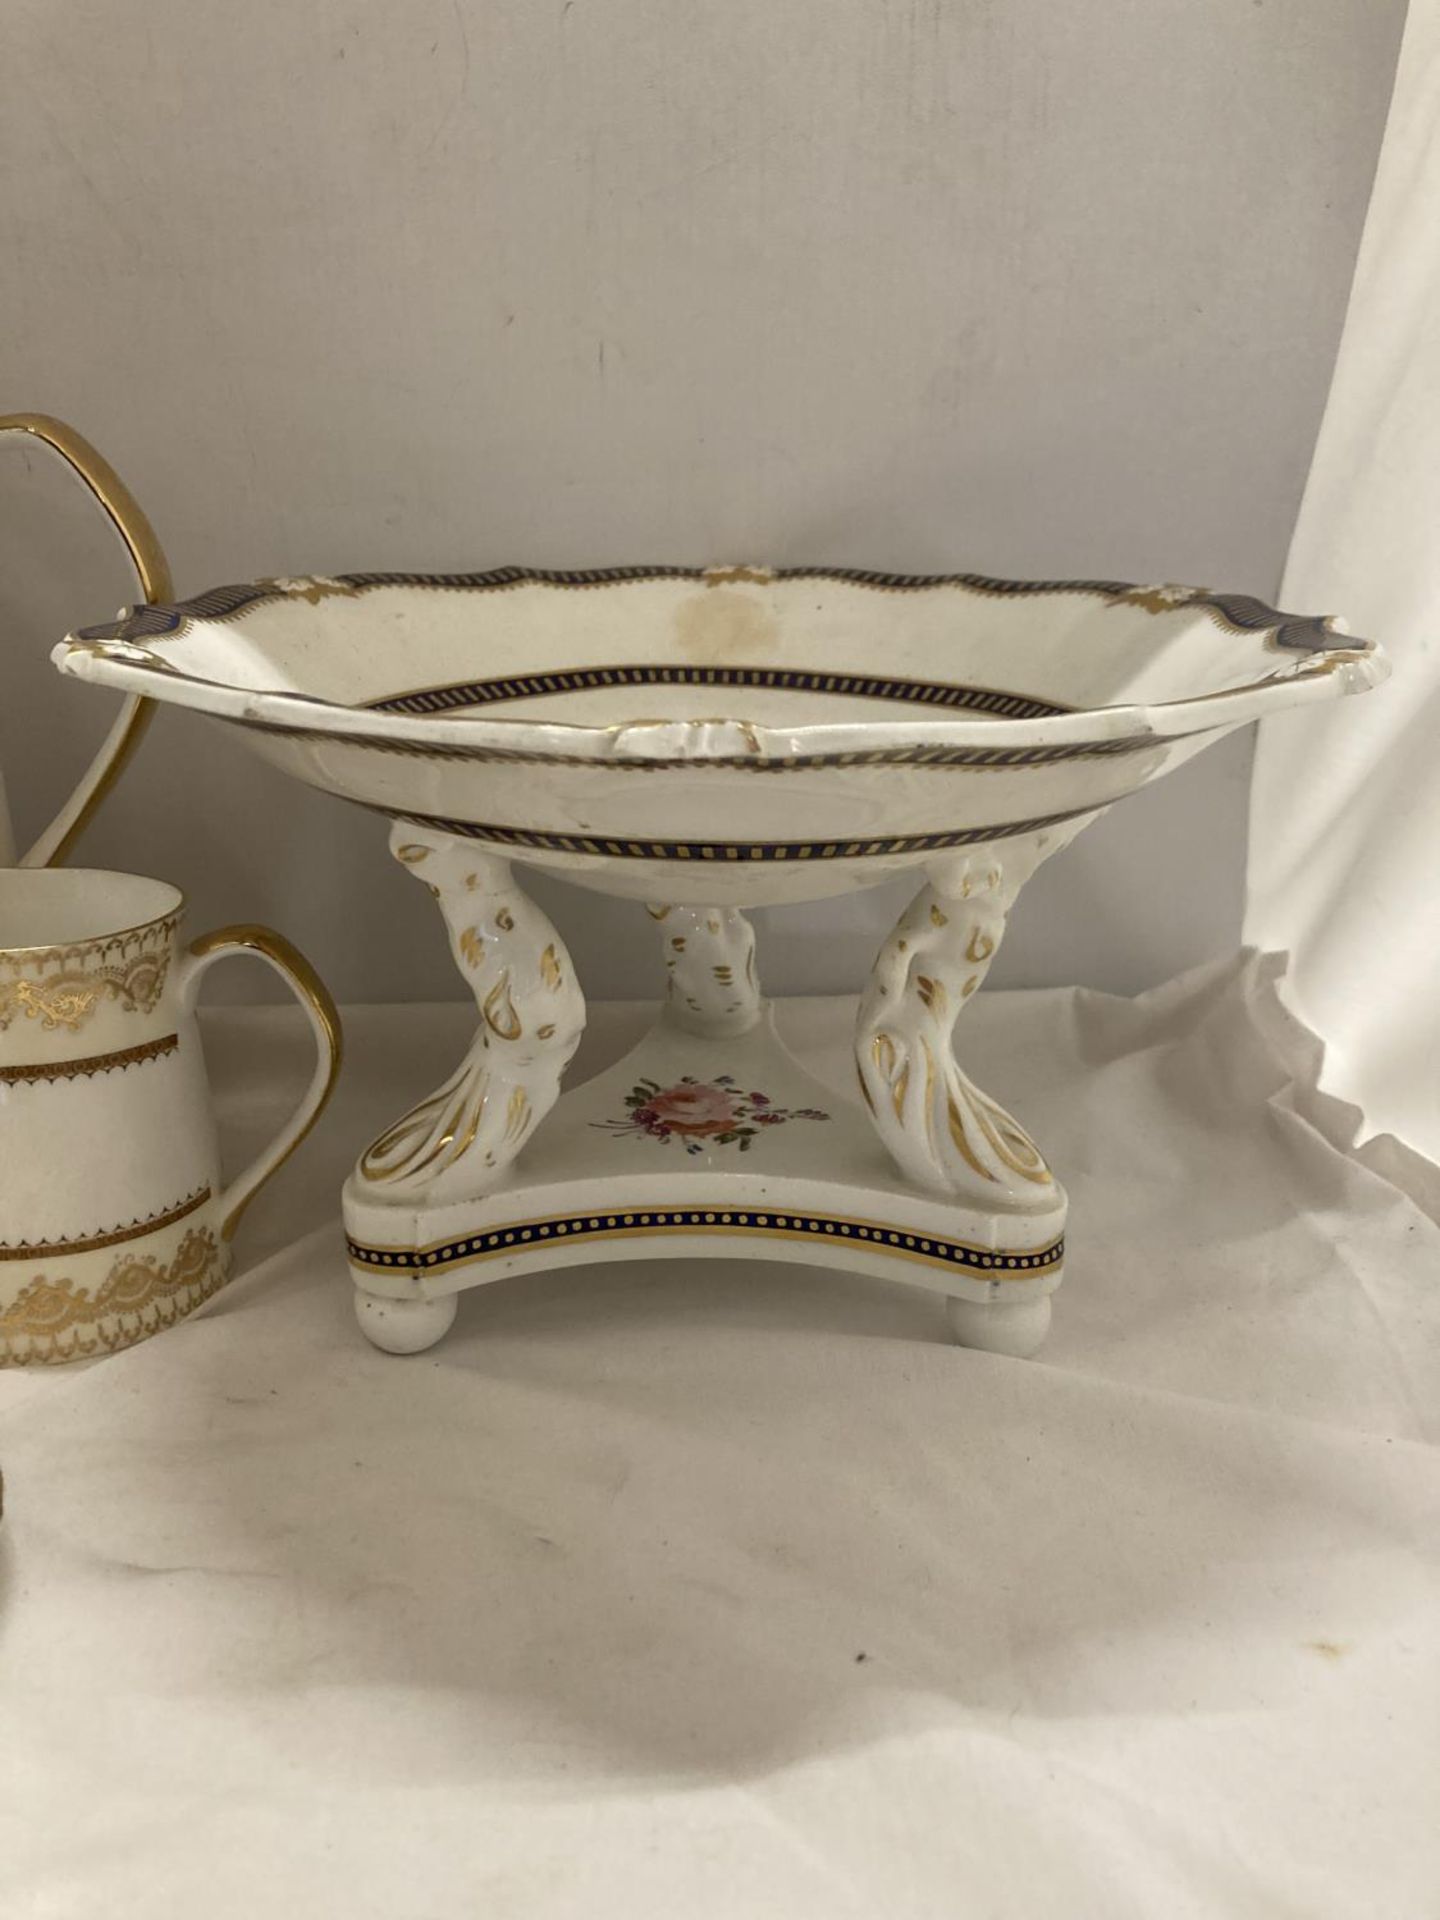 AN 'ELIZABETHAN' COFFEE SET TO INCLUDE A COFFEE POT, CREAM JUG, SUGAR BOWL, COFFEE CANS AND SAUCERS, - Image 6 of 7